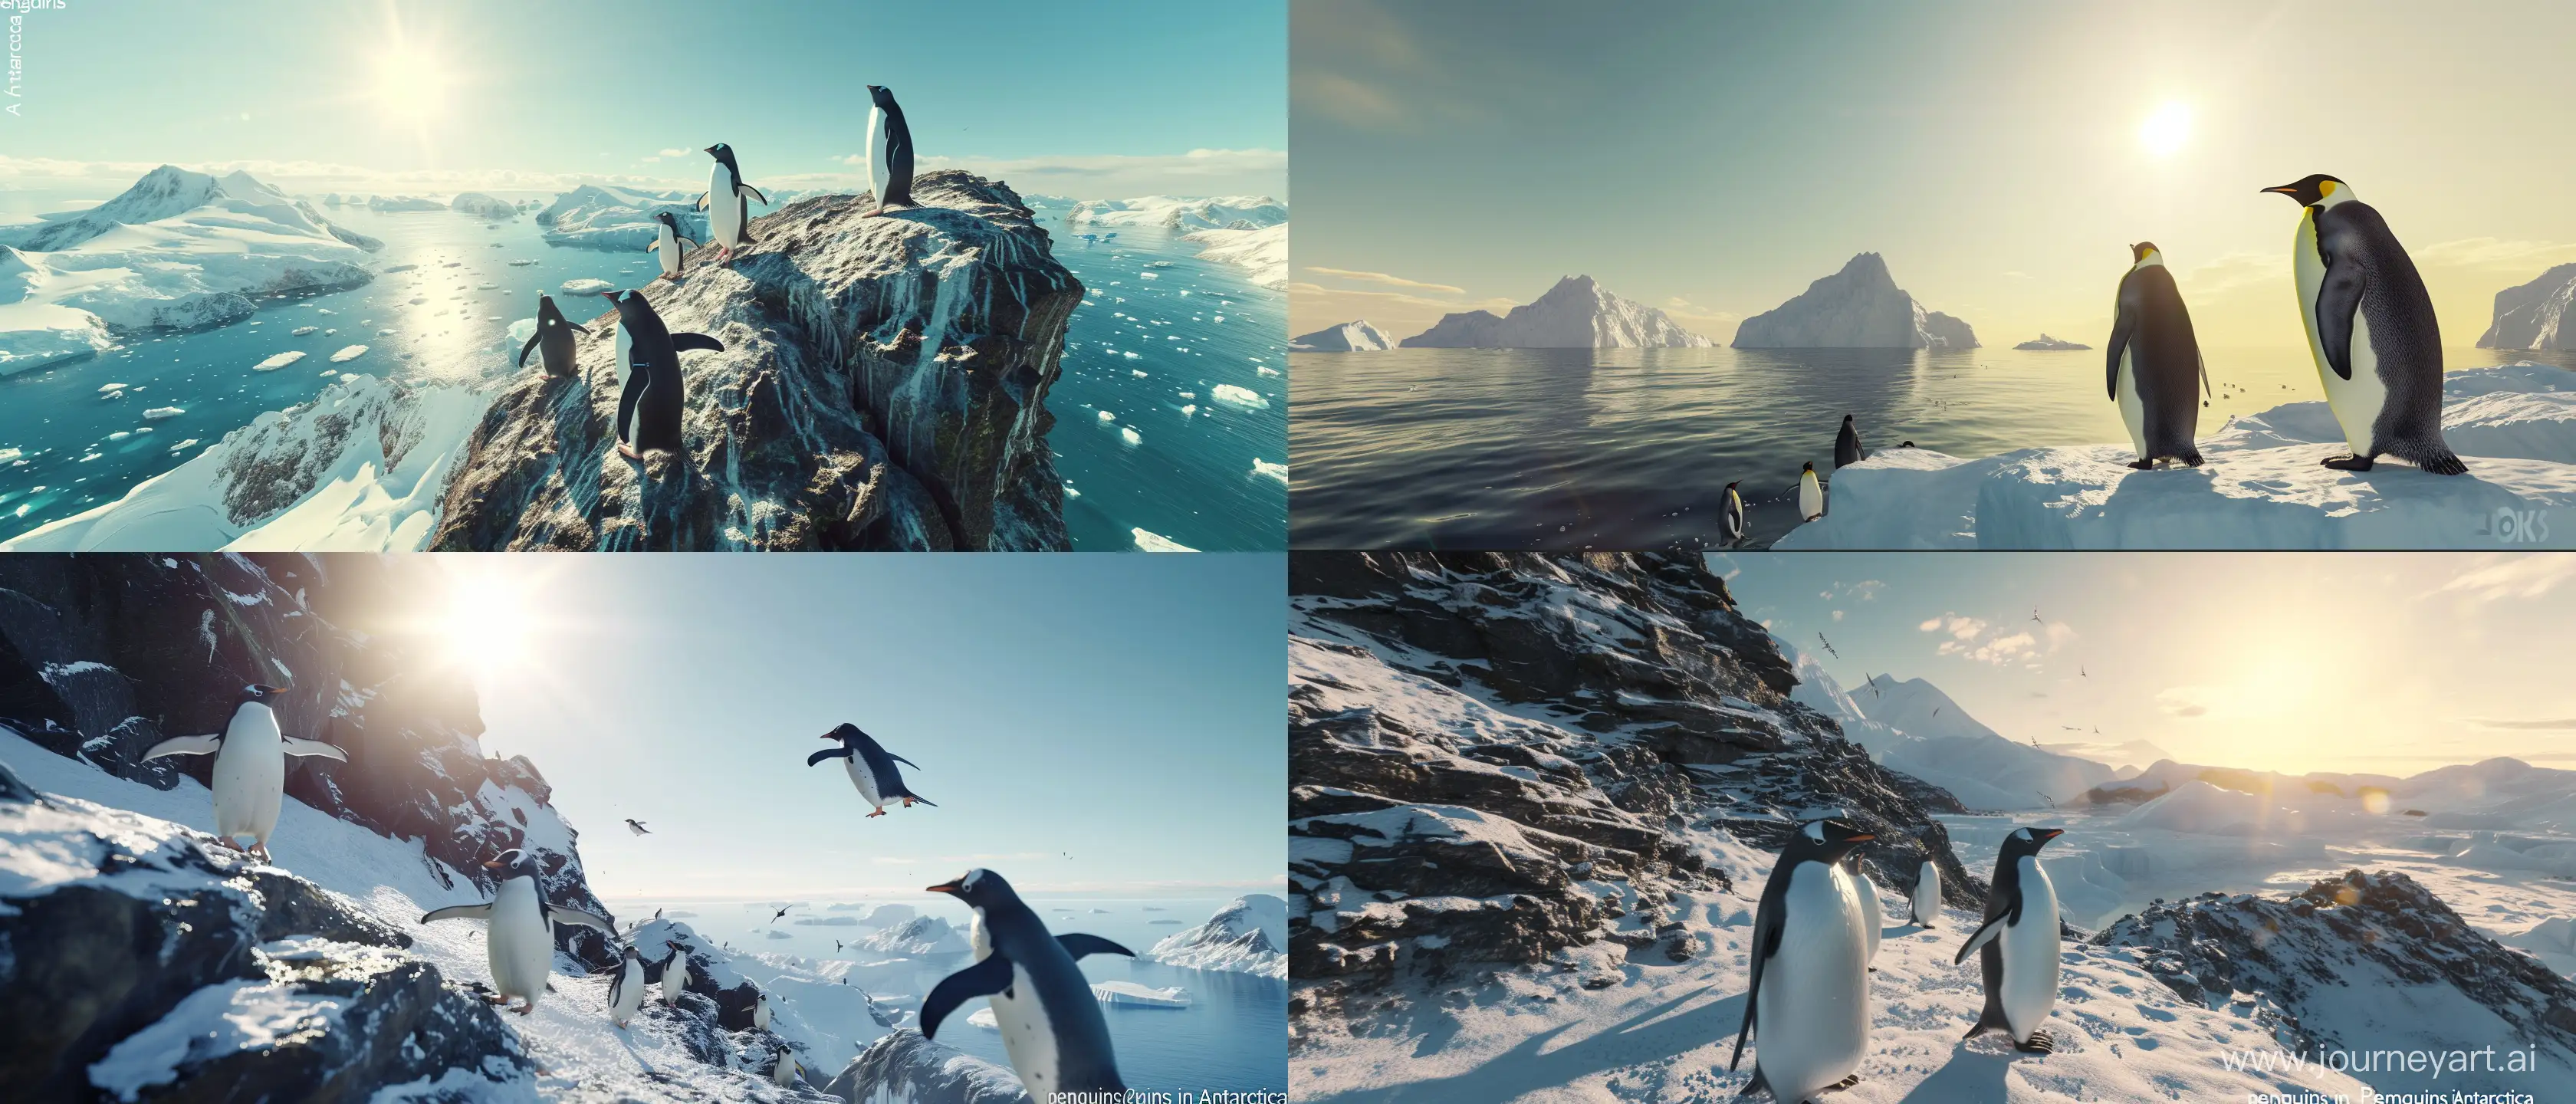 HyperRealistic-Aerial-View-of-Penguins-in-Antarctica-on-a-Sunny-Day